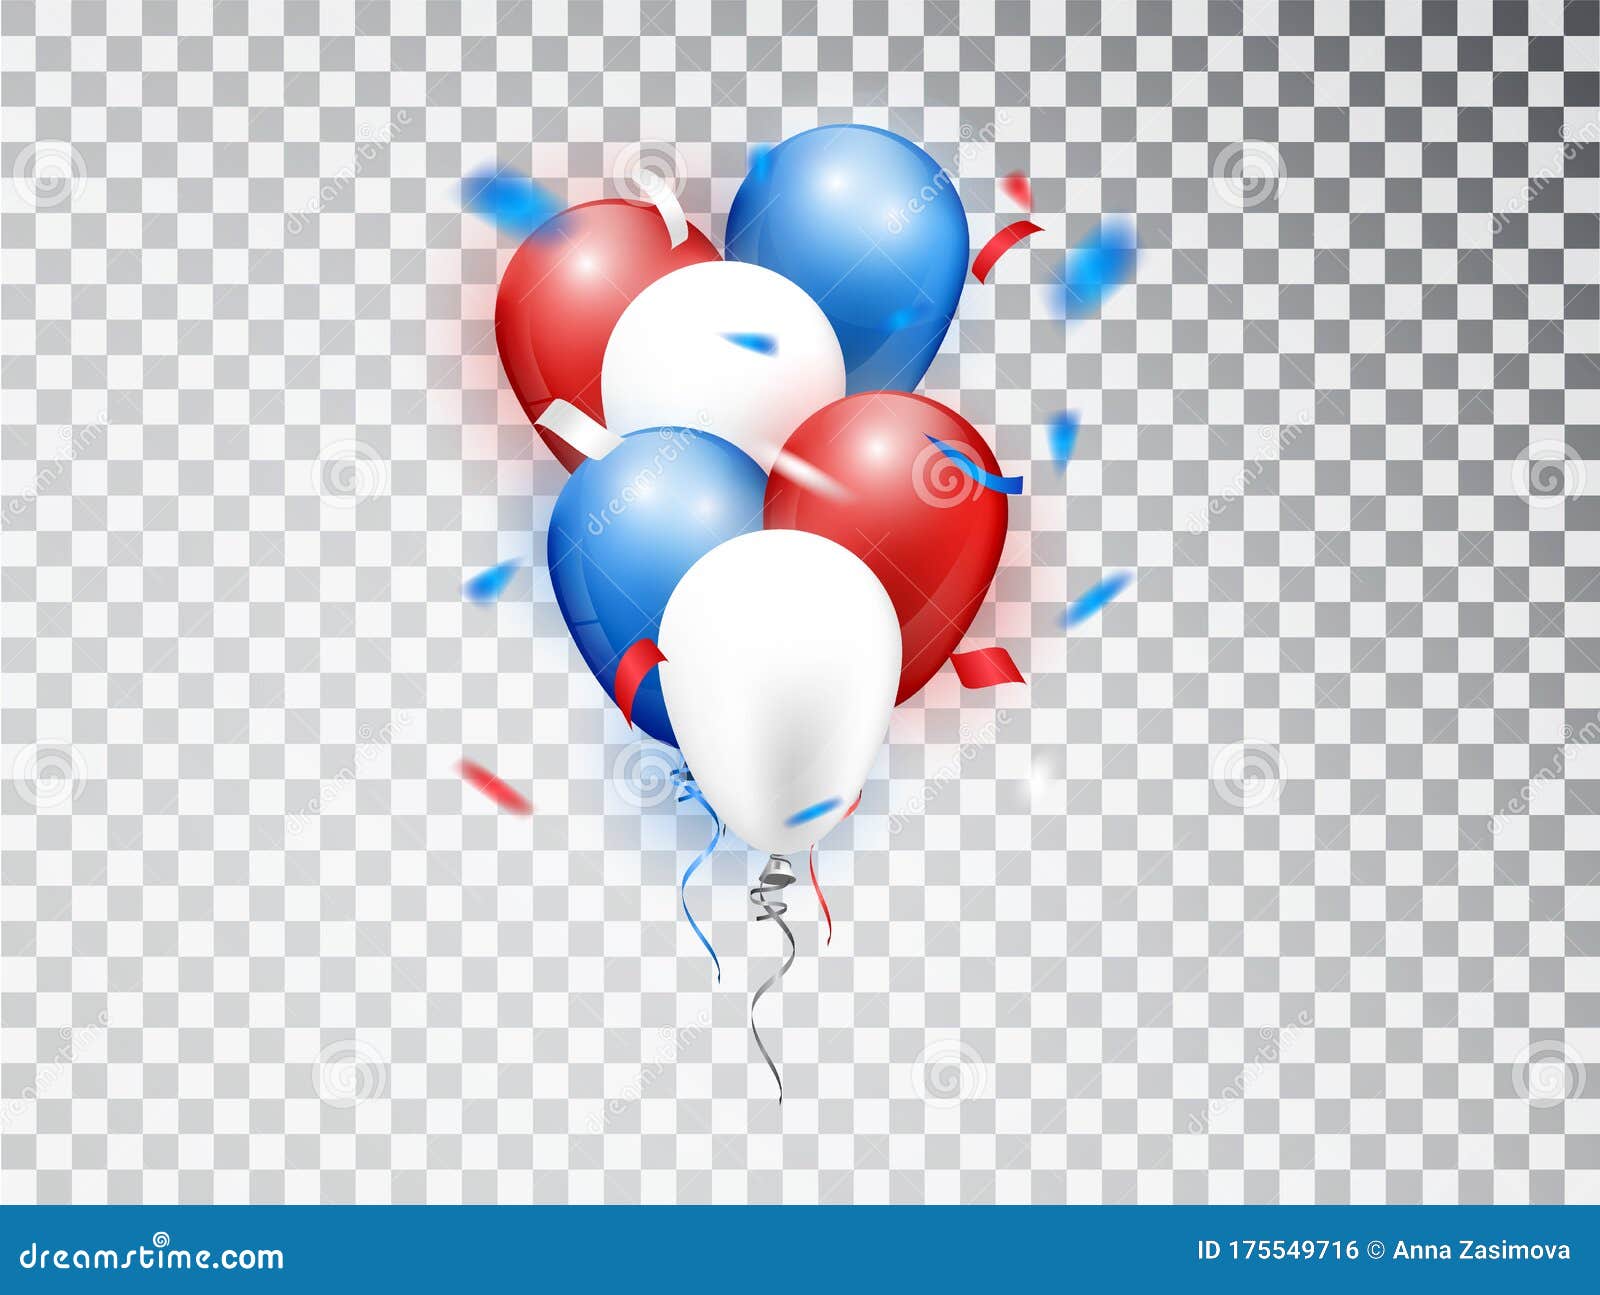 realistic balloons composicion in red, blue and white colors.  s  for national holiday backgrounds